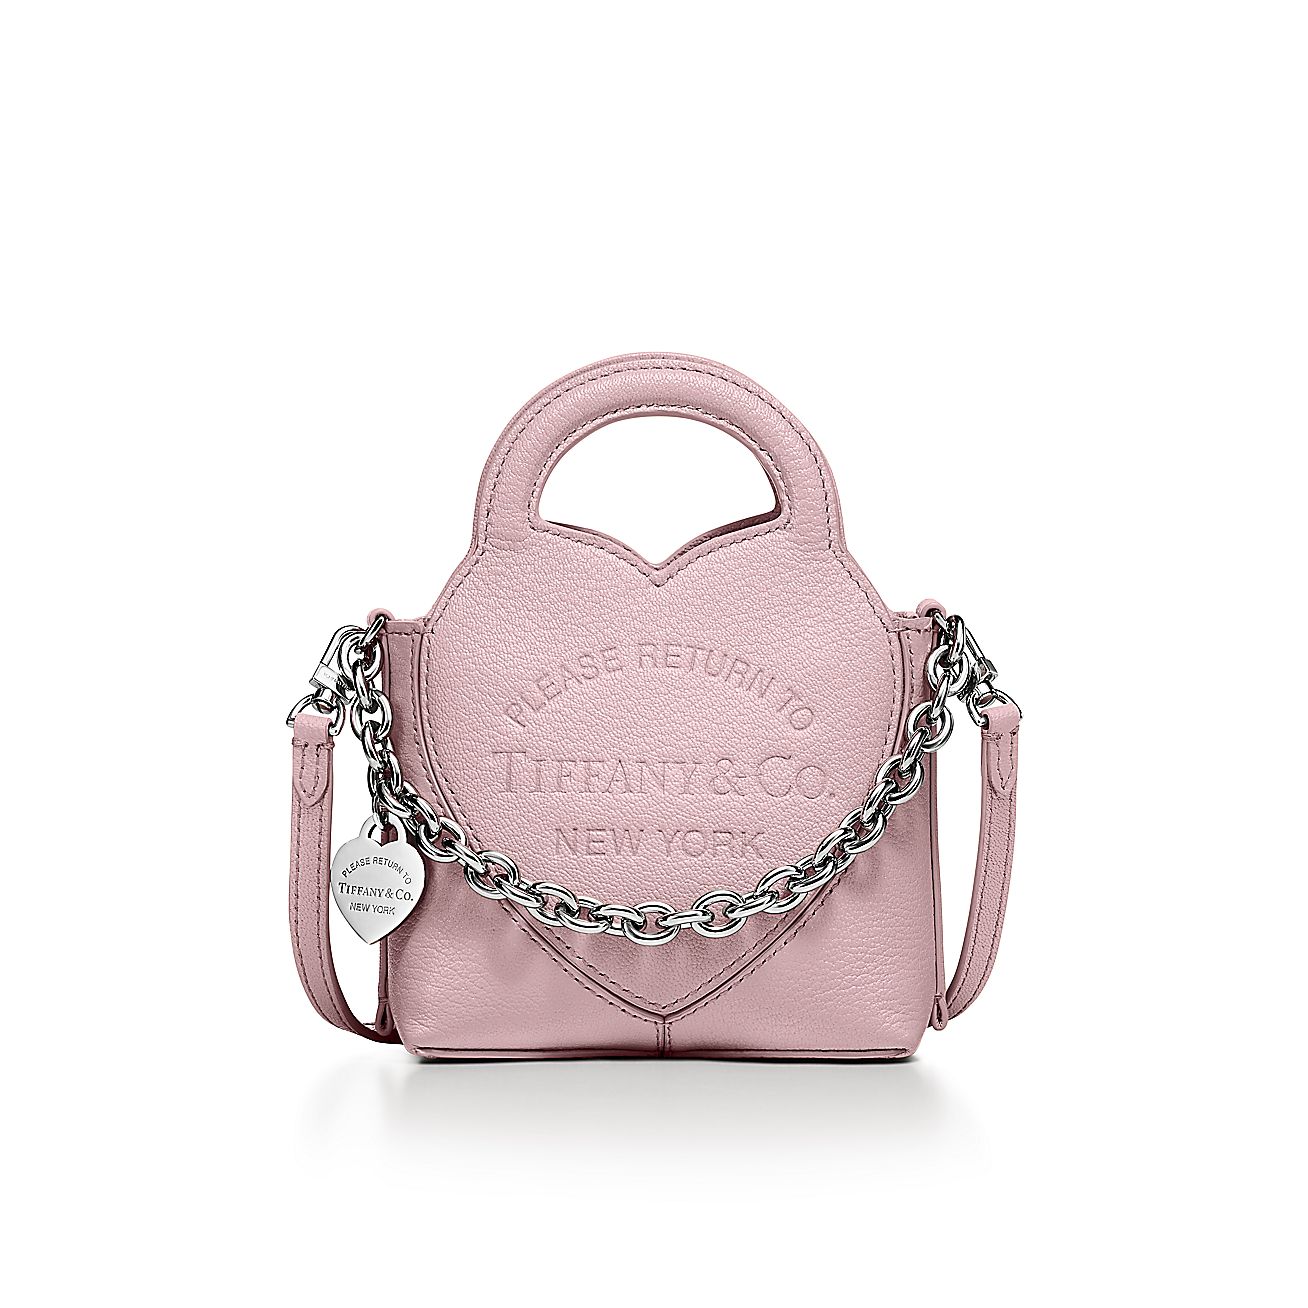 Introducing the new Return To Tiffany Micro Tote by @tiffanyandco, Bo